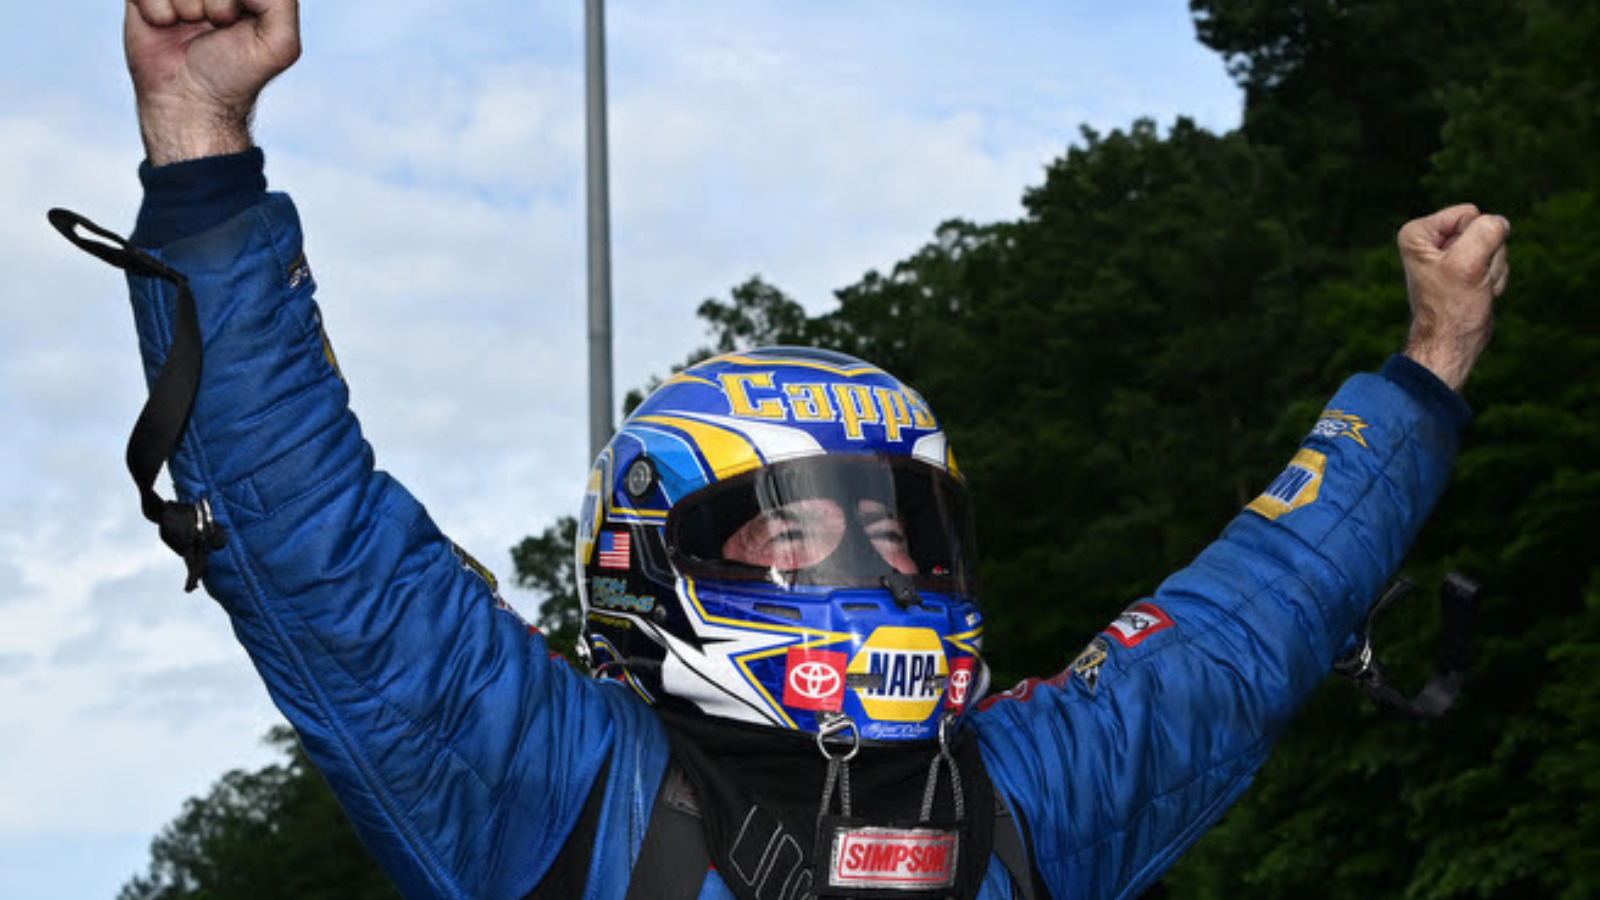 ron-capps-becomes-winningest-driver-at-bristol-dragway-with-thunder-valley-nationals-victory